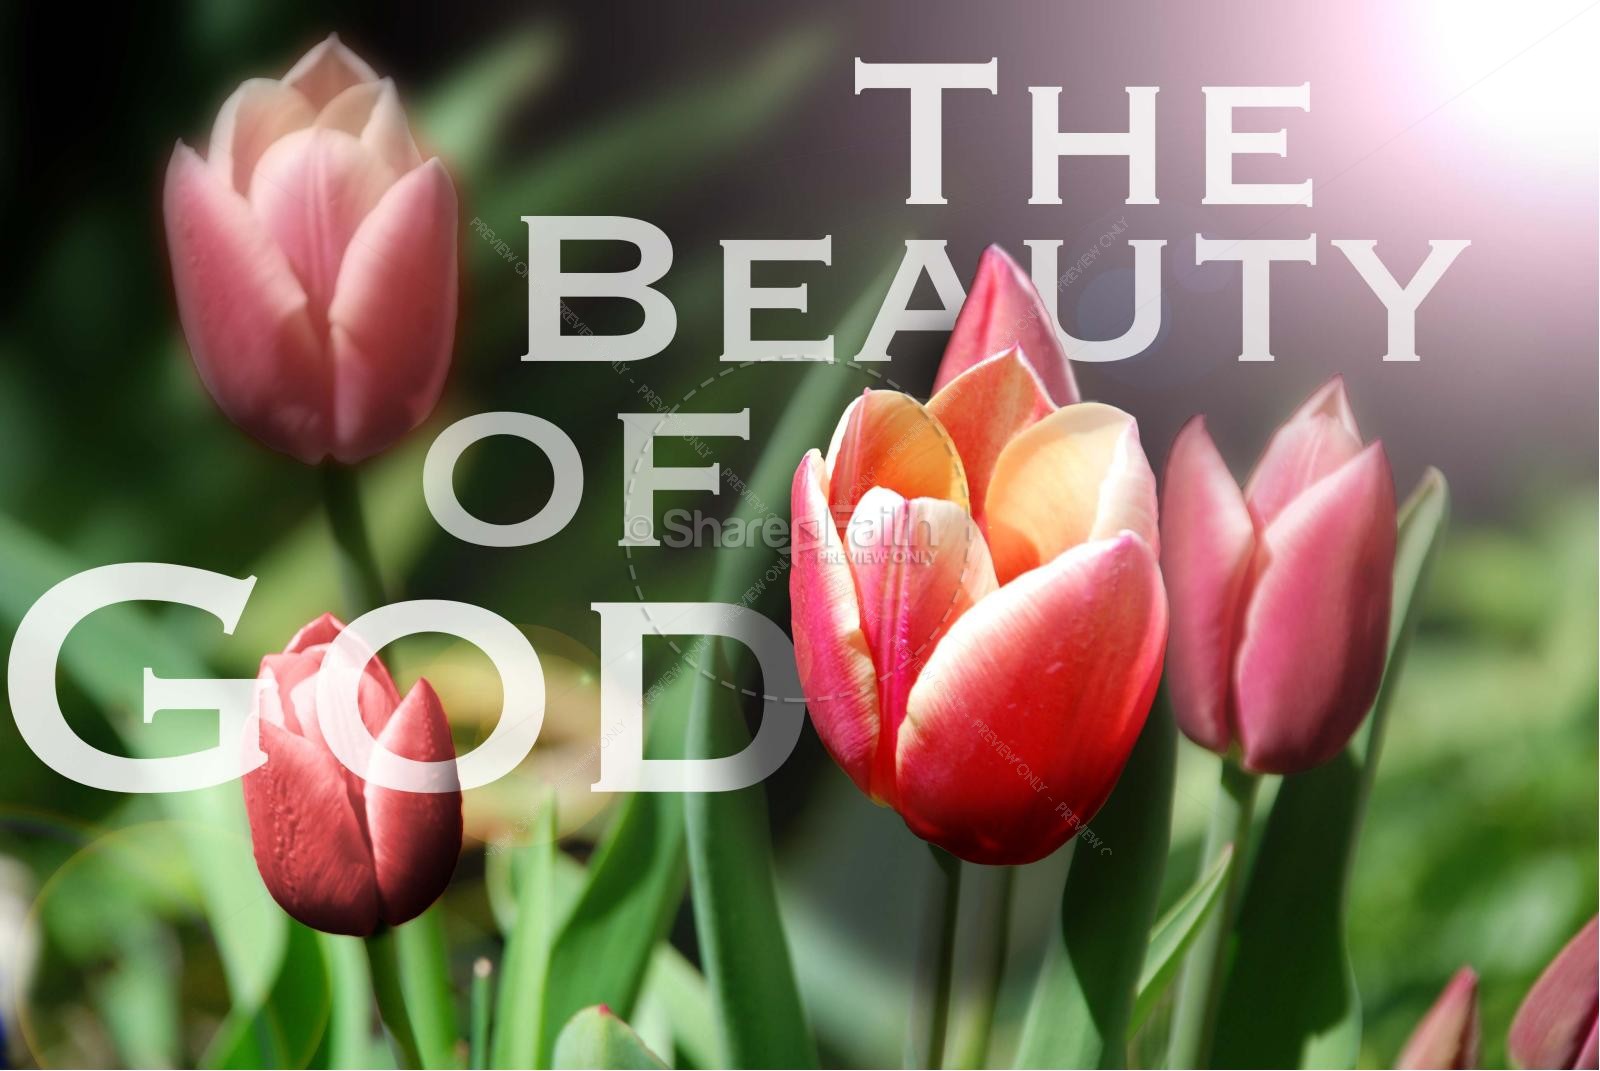 Beauty of God with Tulips Thumbnail 1